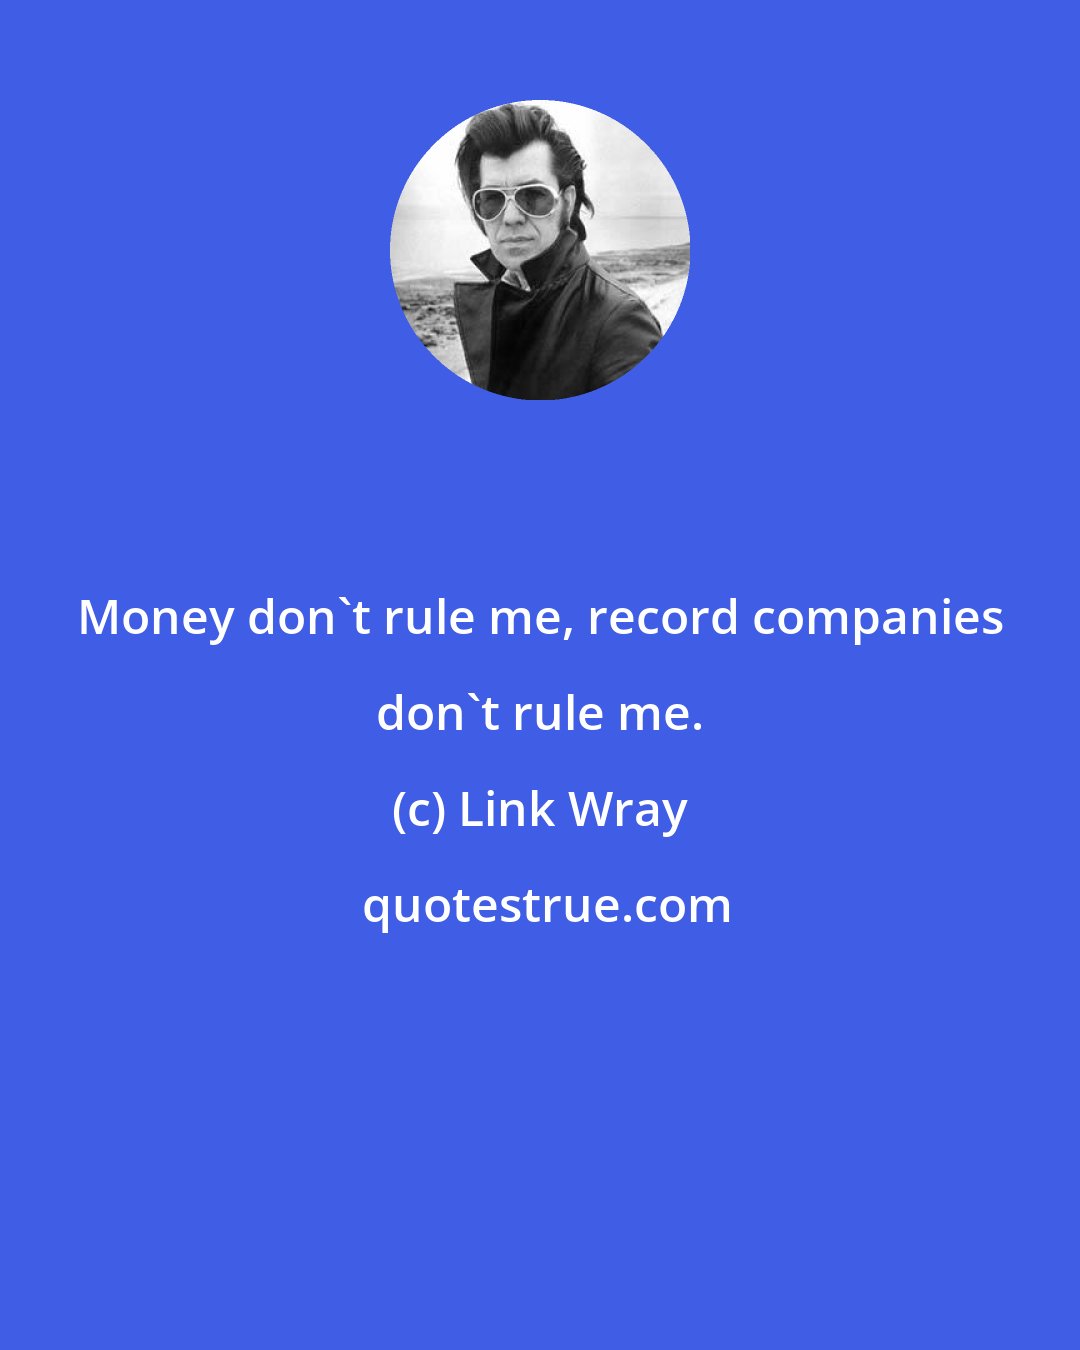 Link Wray: Money don't rule me, record companies don't rule me.